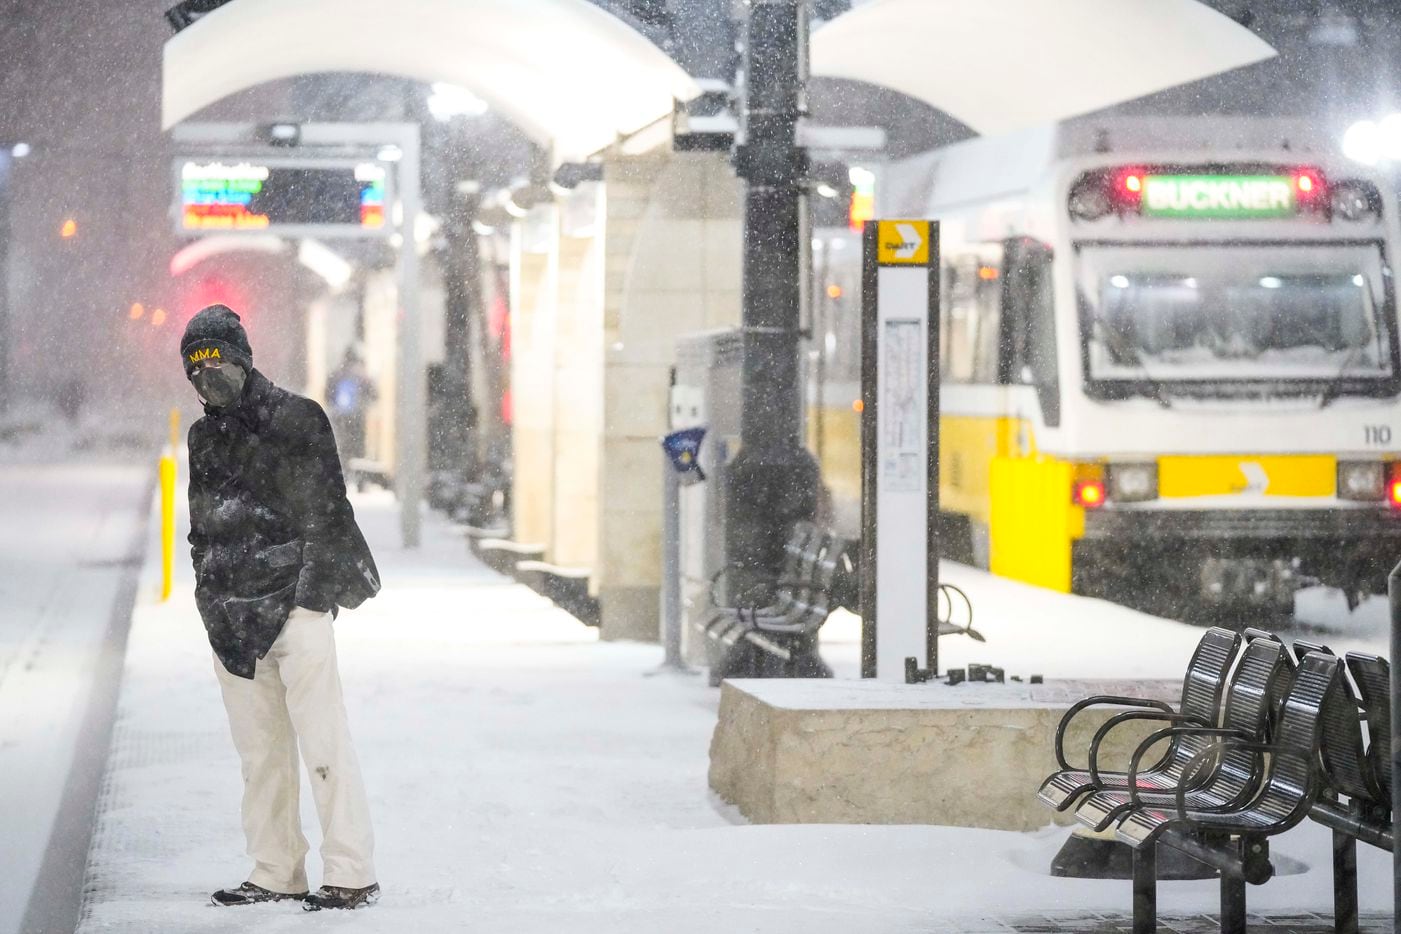 Victor Escamilla looks down the tracks as people wait in driving snow at the Pearl/Arts District station as a winter storm brings snow and freezing temperatures to North Texas on Sunday, Feb. 14, 2021, in Dallas.  DART suspended all rail operations Sunday night.